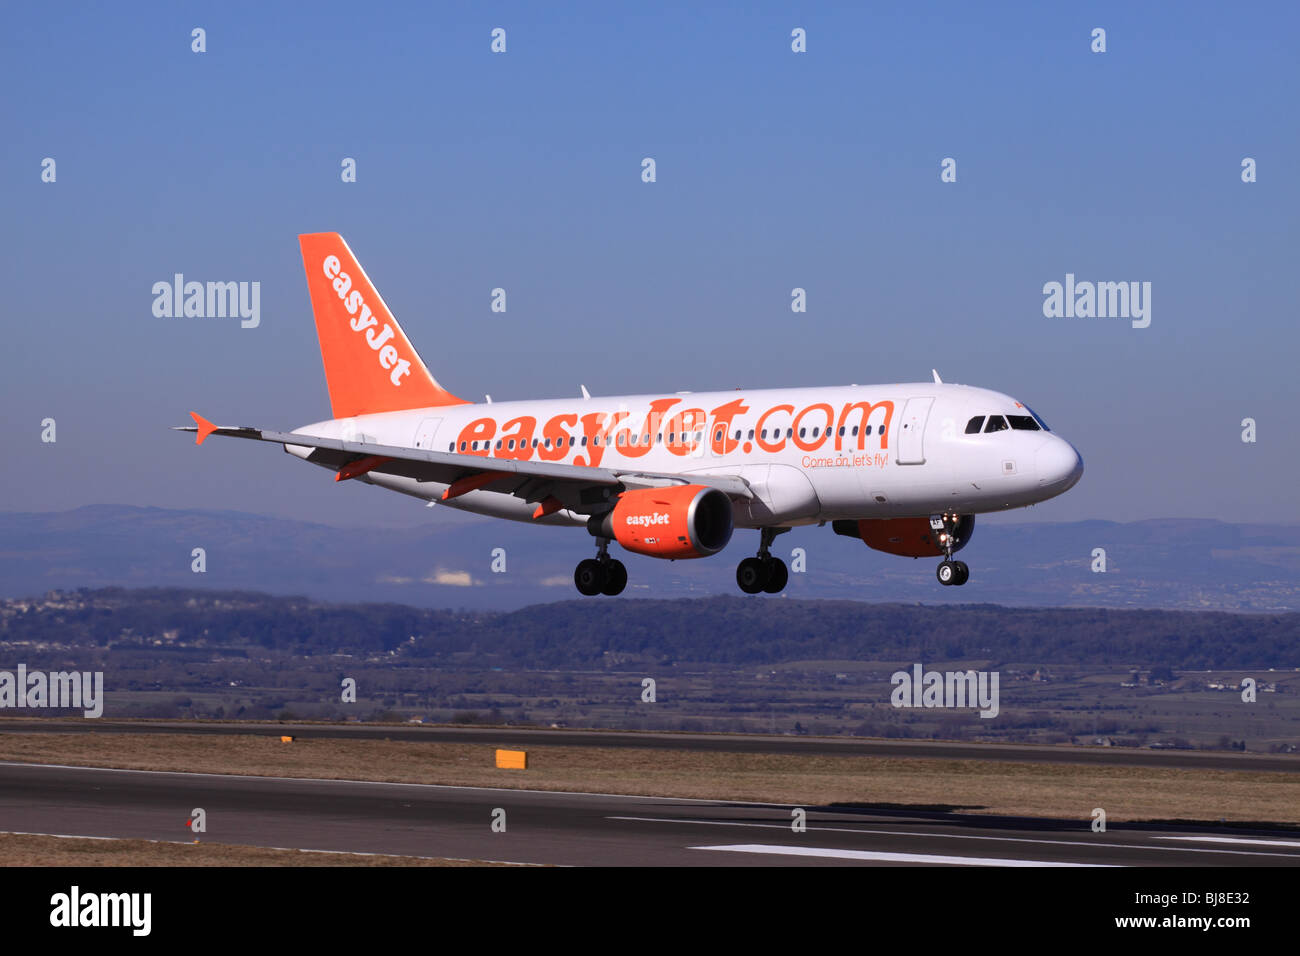 Easyjet Airbus A319 aircraft plane landing airline Stock Photo